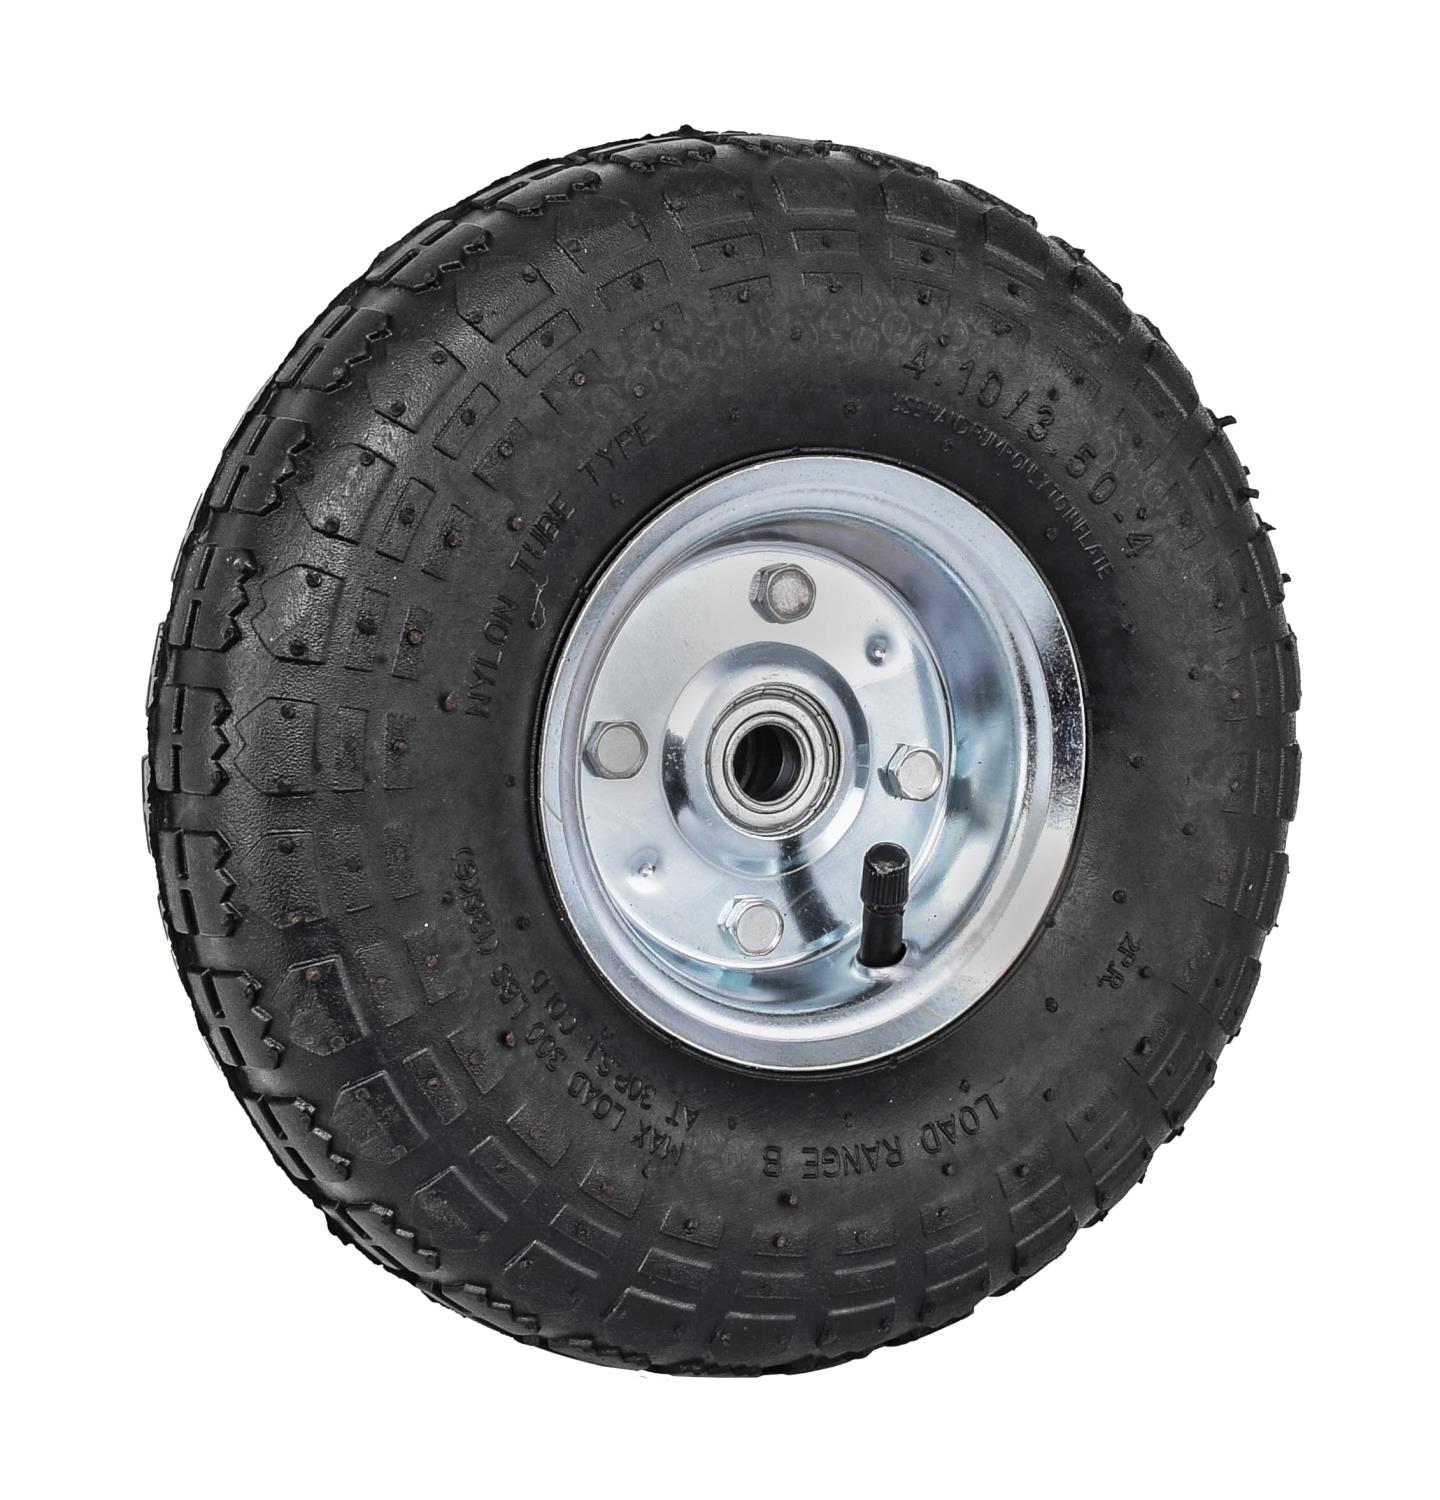 Replacement Wheel for JEGS Trailer Dolly 555-79018